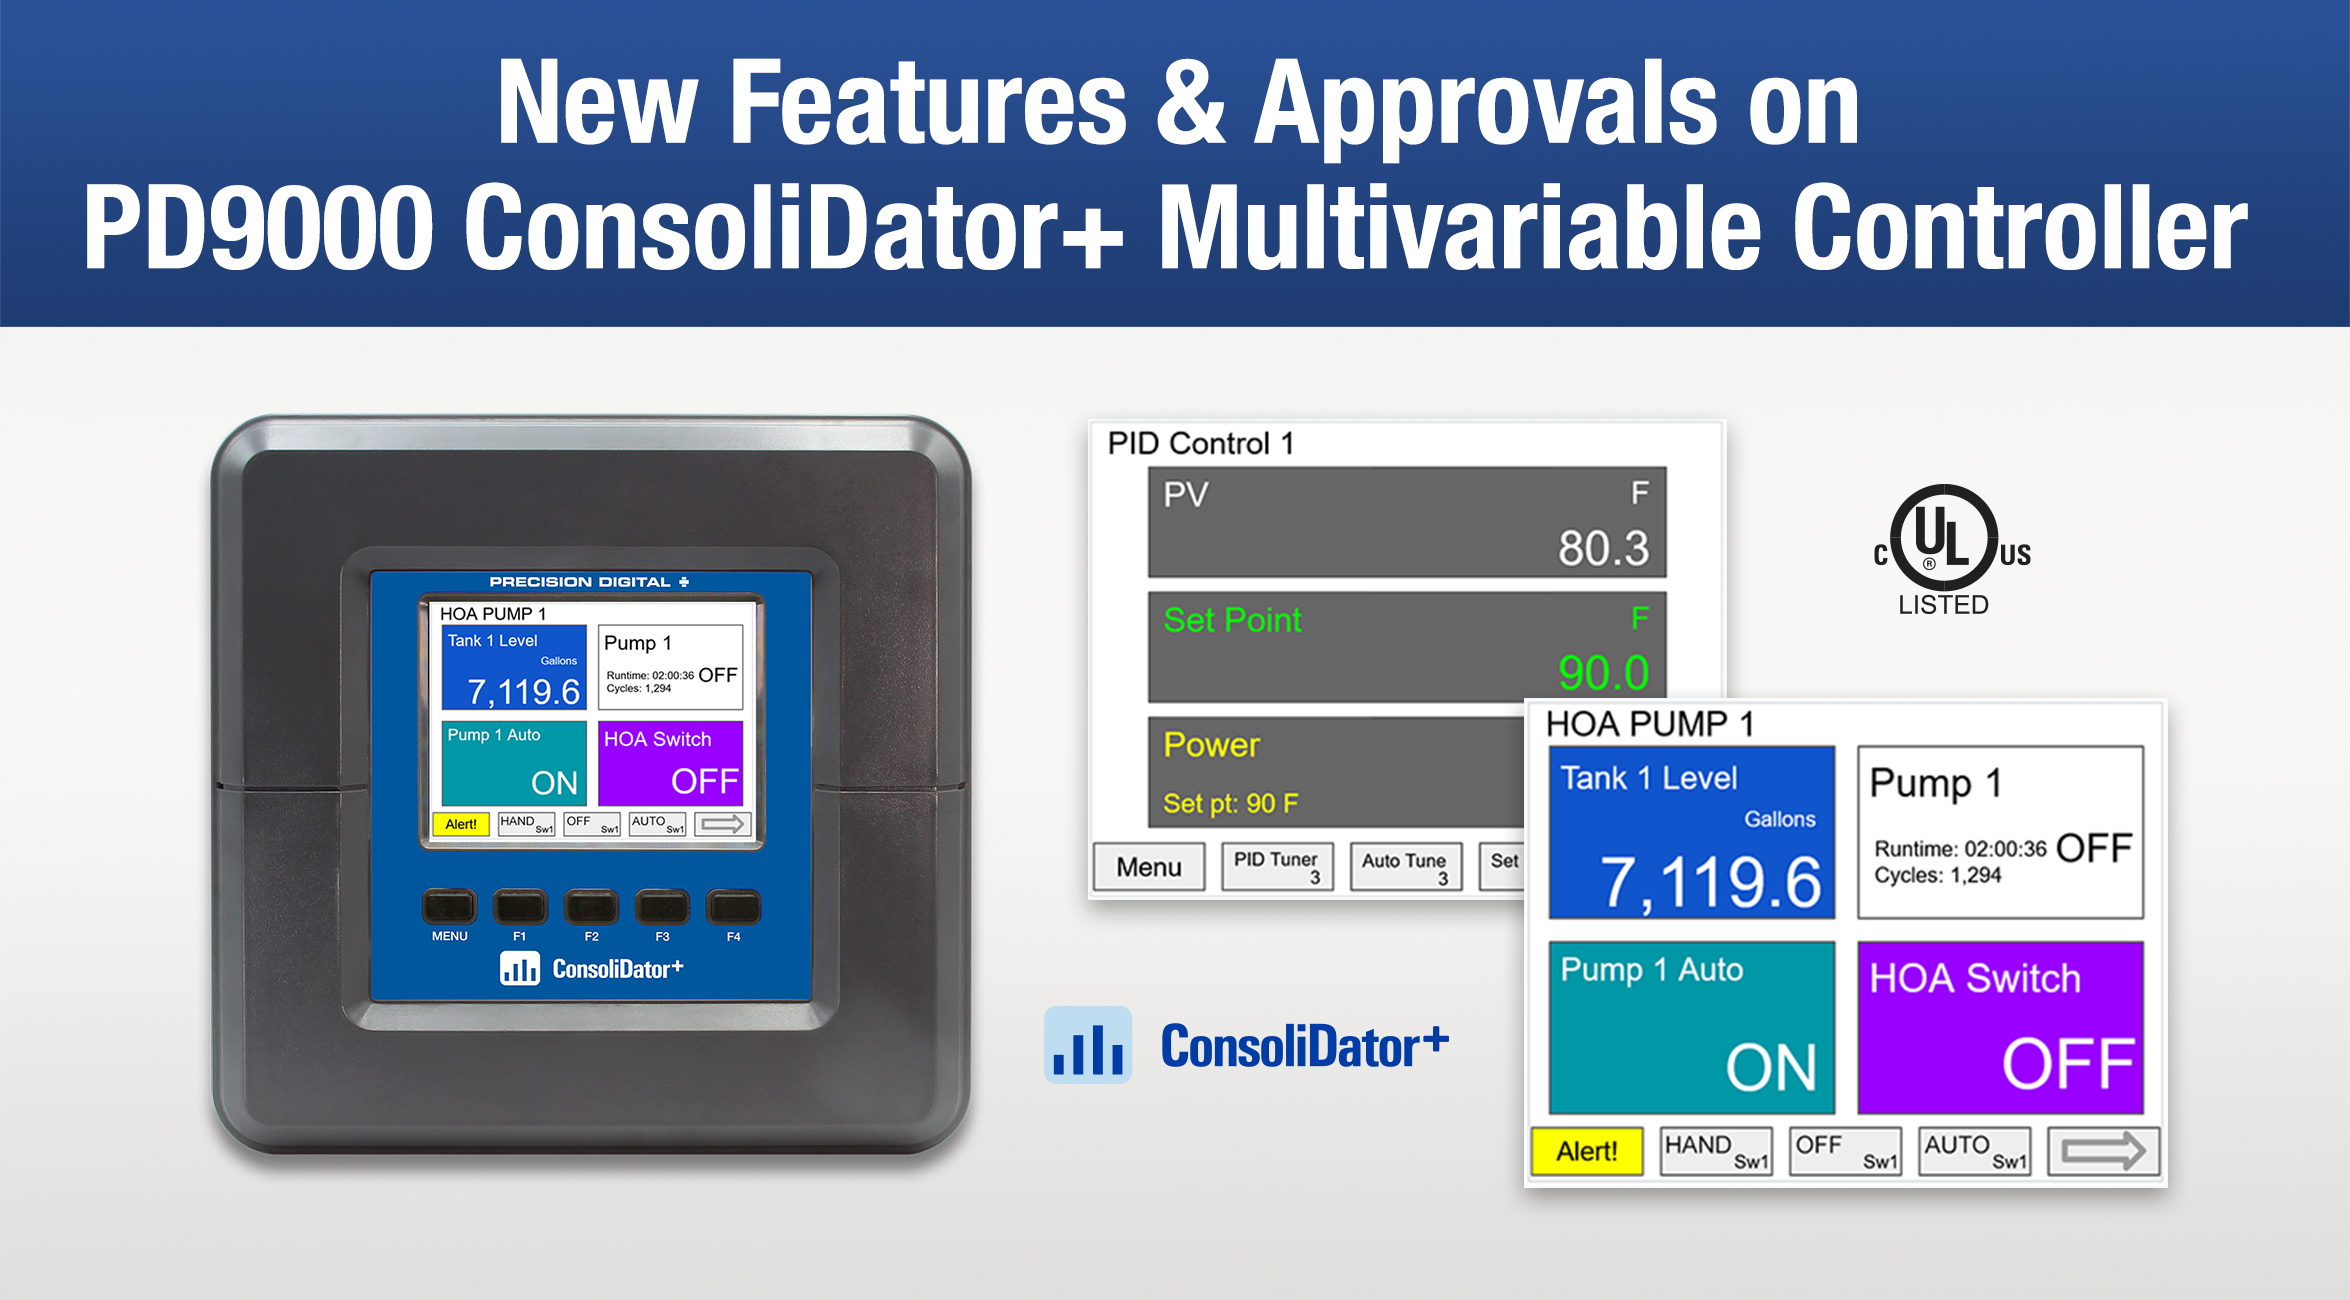 New Features and Approvals on PD9000 ConsoliDator+ Multivariable Controller